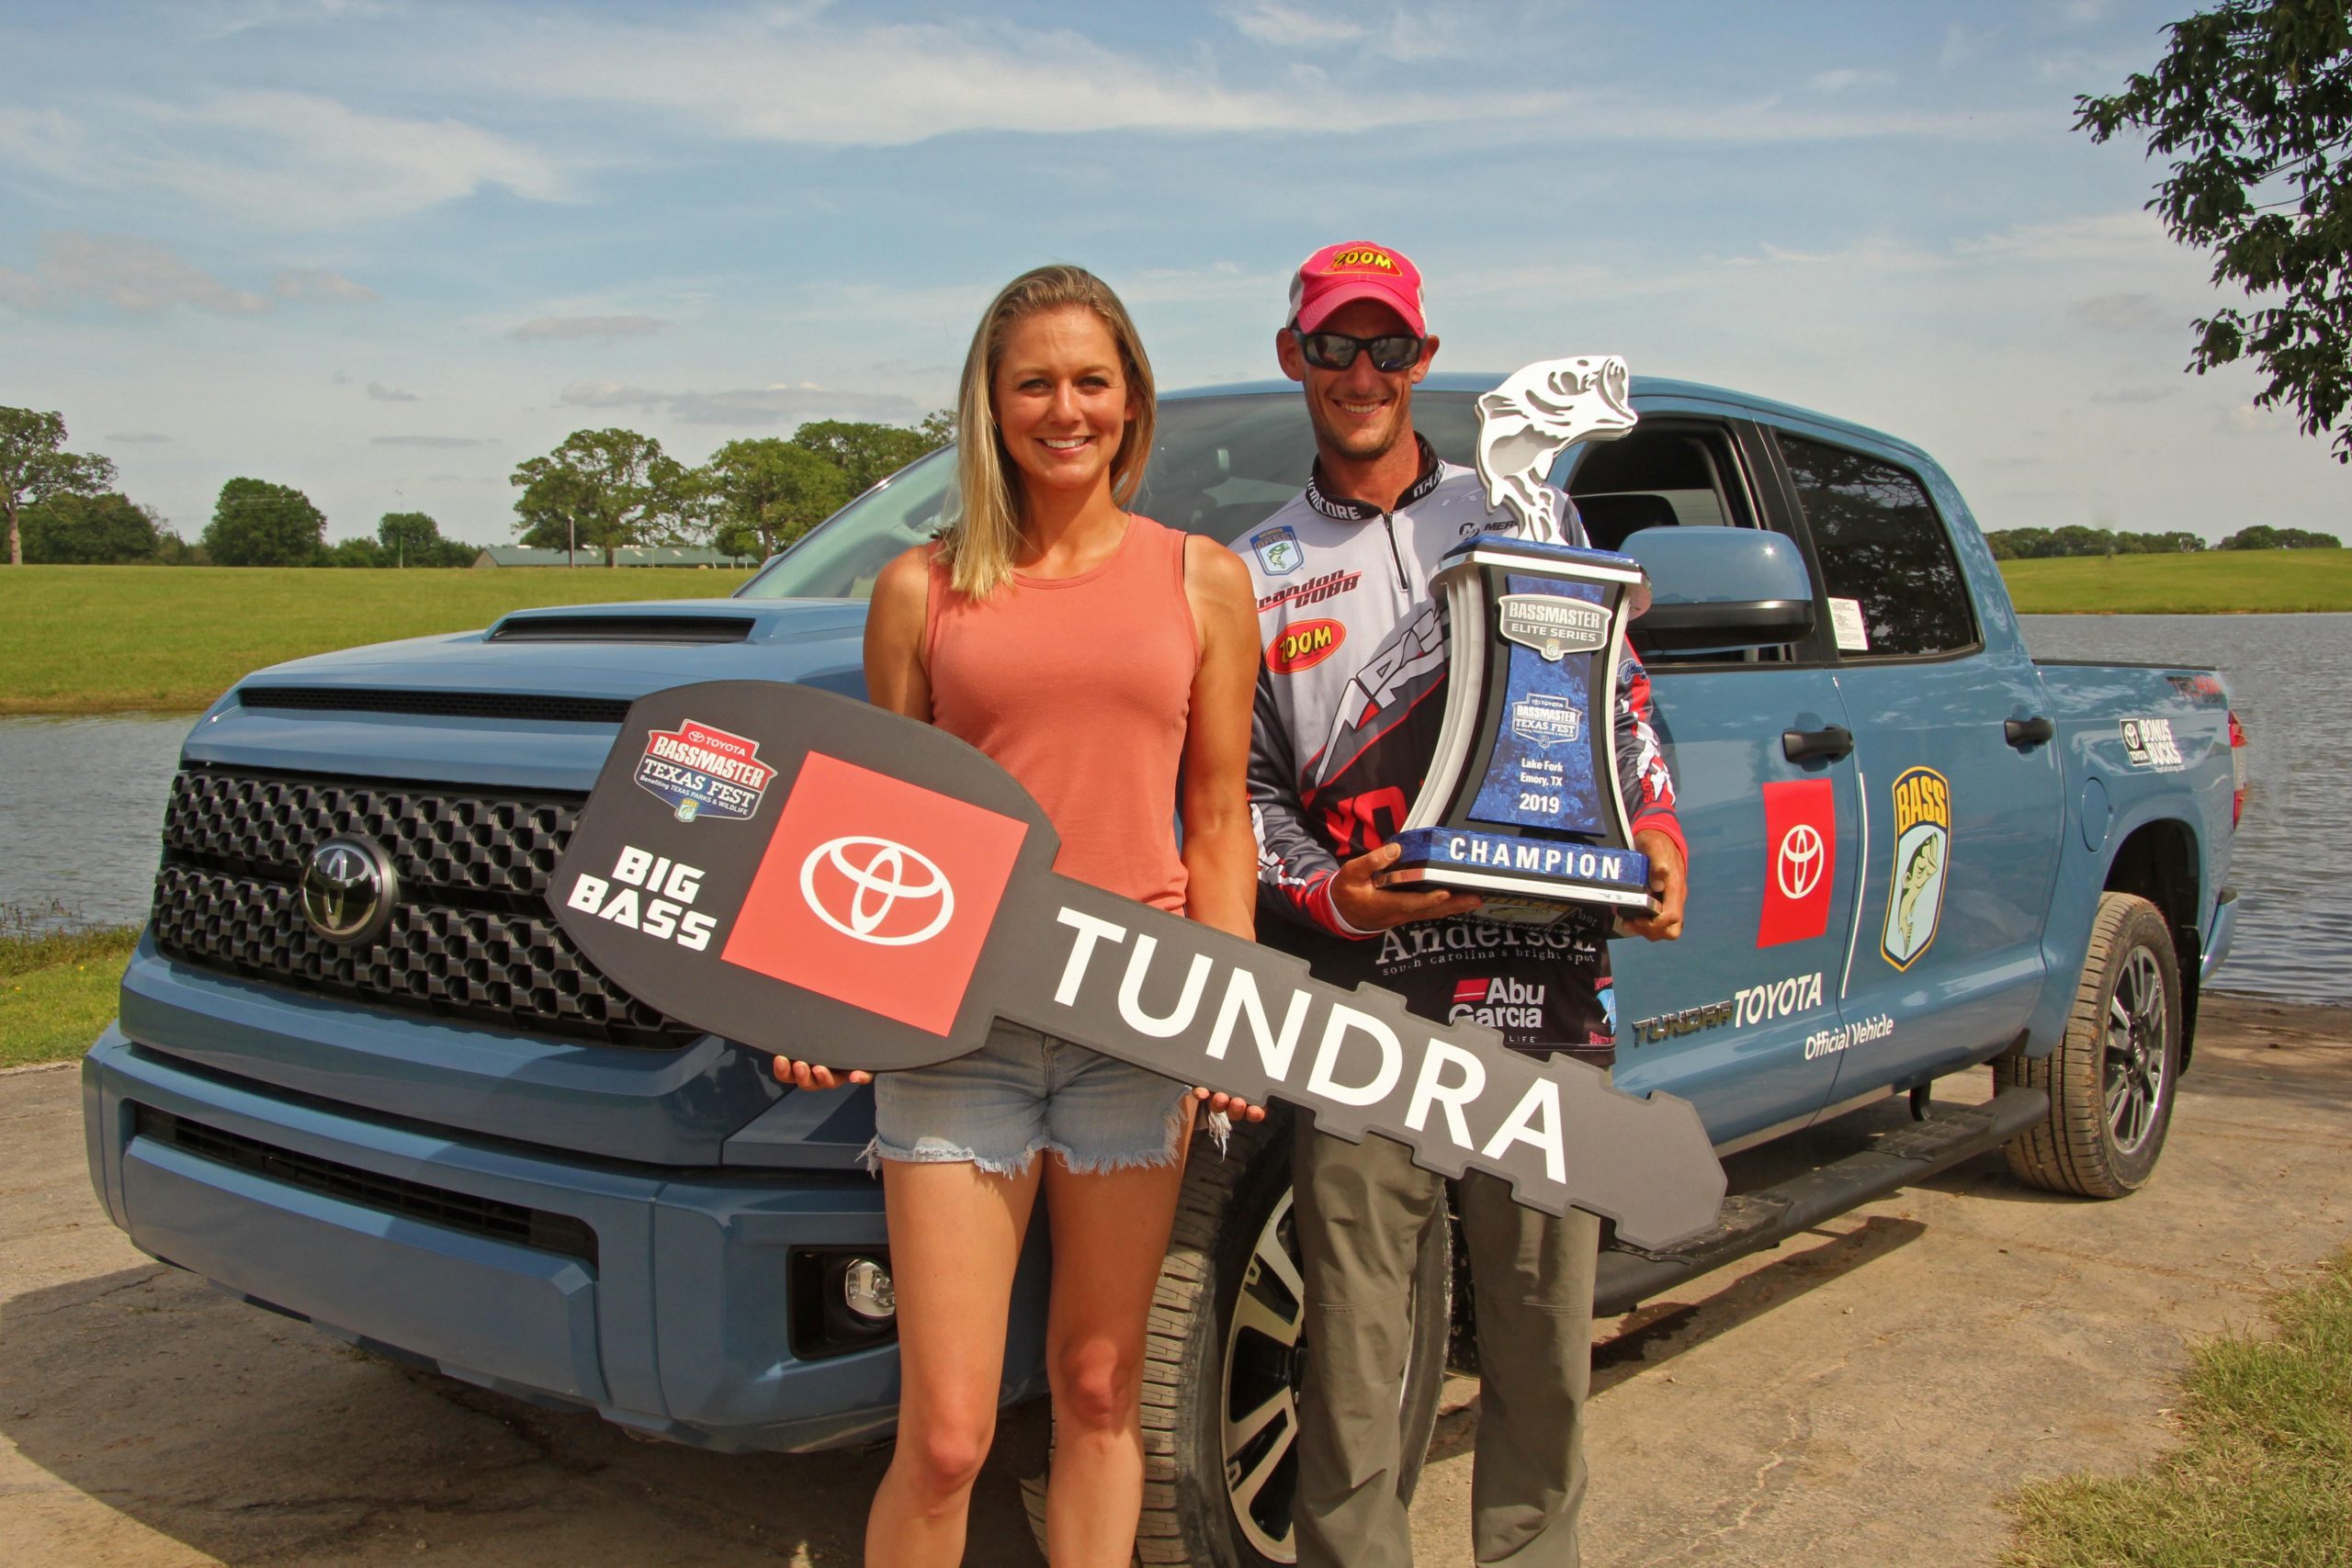 Cobb Wins New Toyota Tundra at 2019 Texas Fest - Wired2Fish